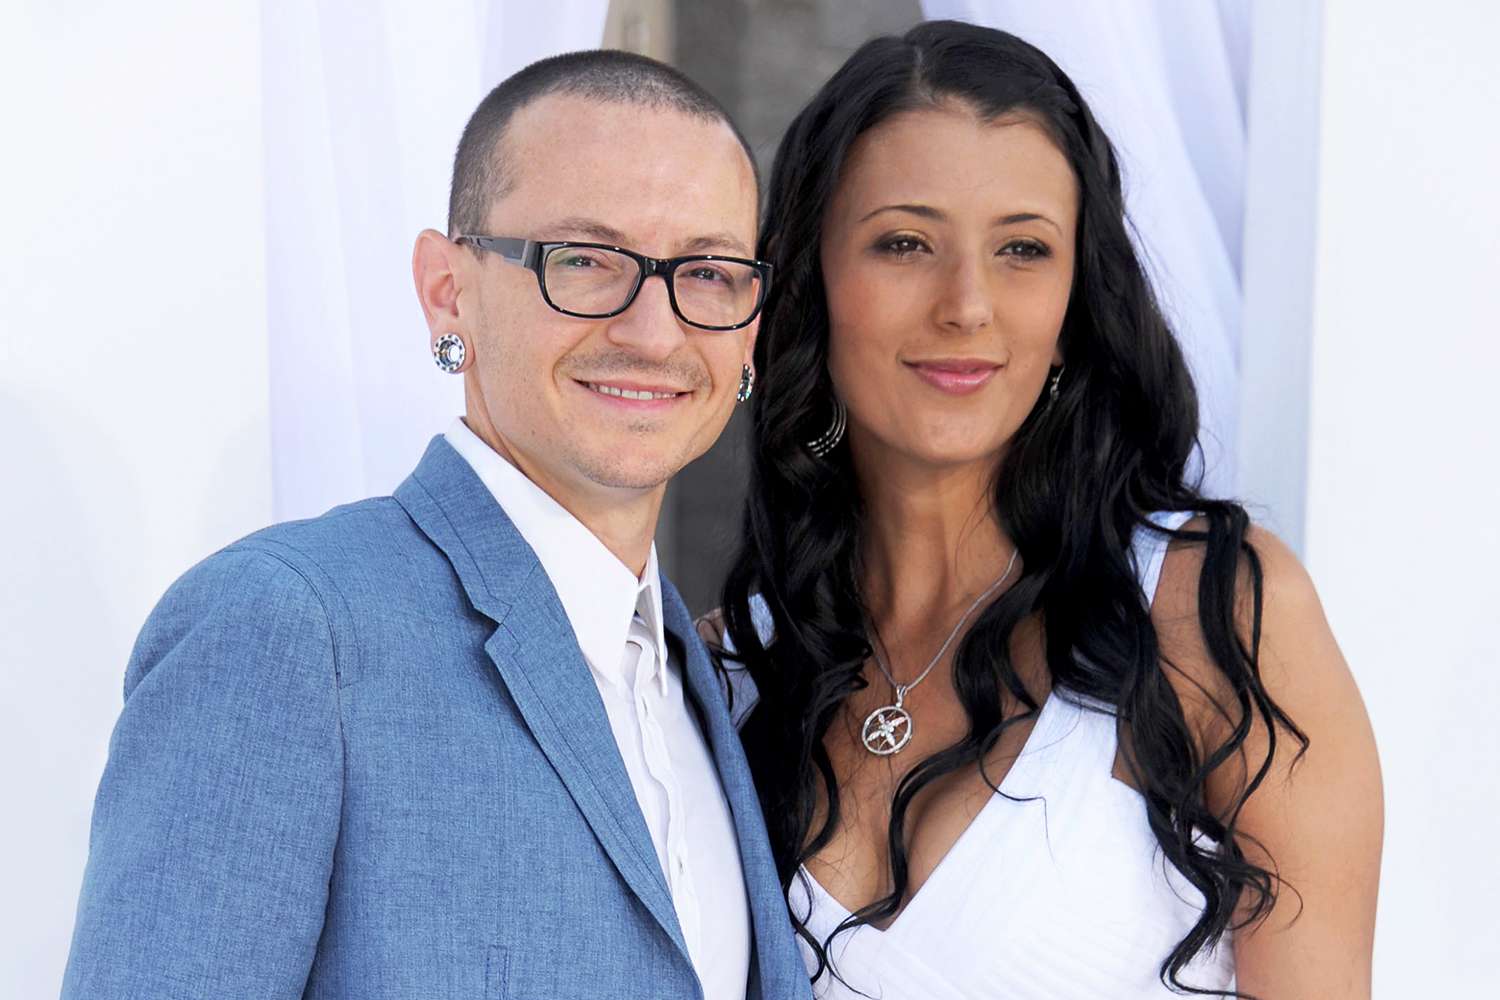 Chester Bennington of Linkin Park and wife Talinda Ann Bentley arrive at the 2012 Billboard Music Awards at MGM Grand on May 20, 2012 em las vegas, Nevada.